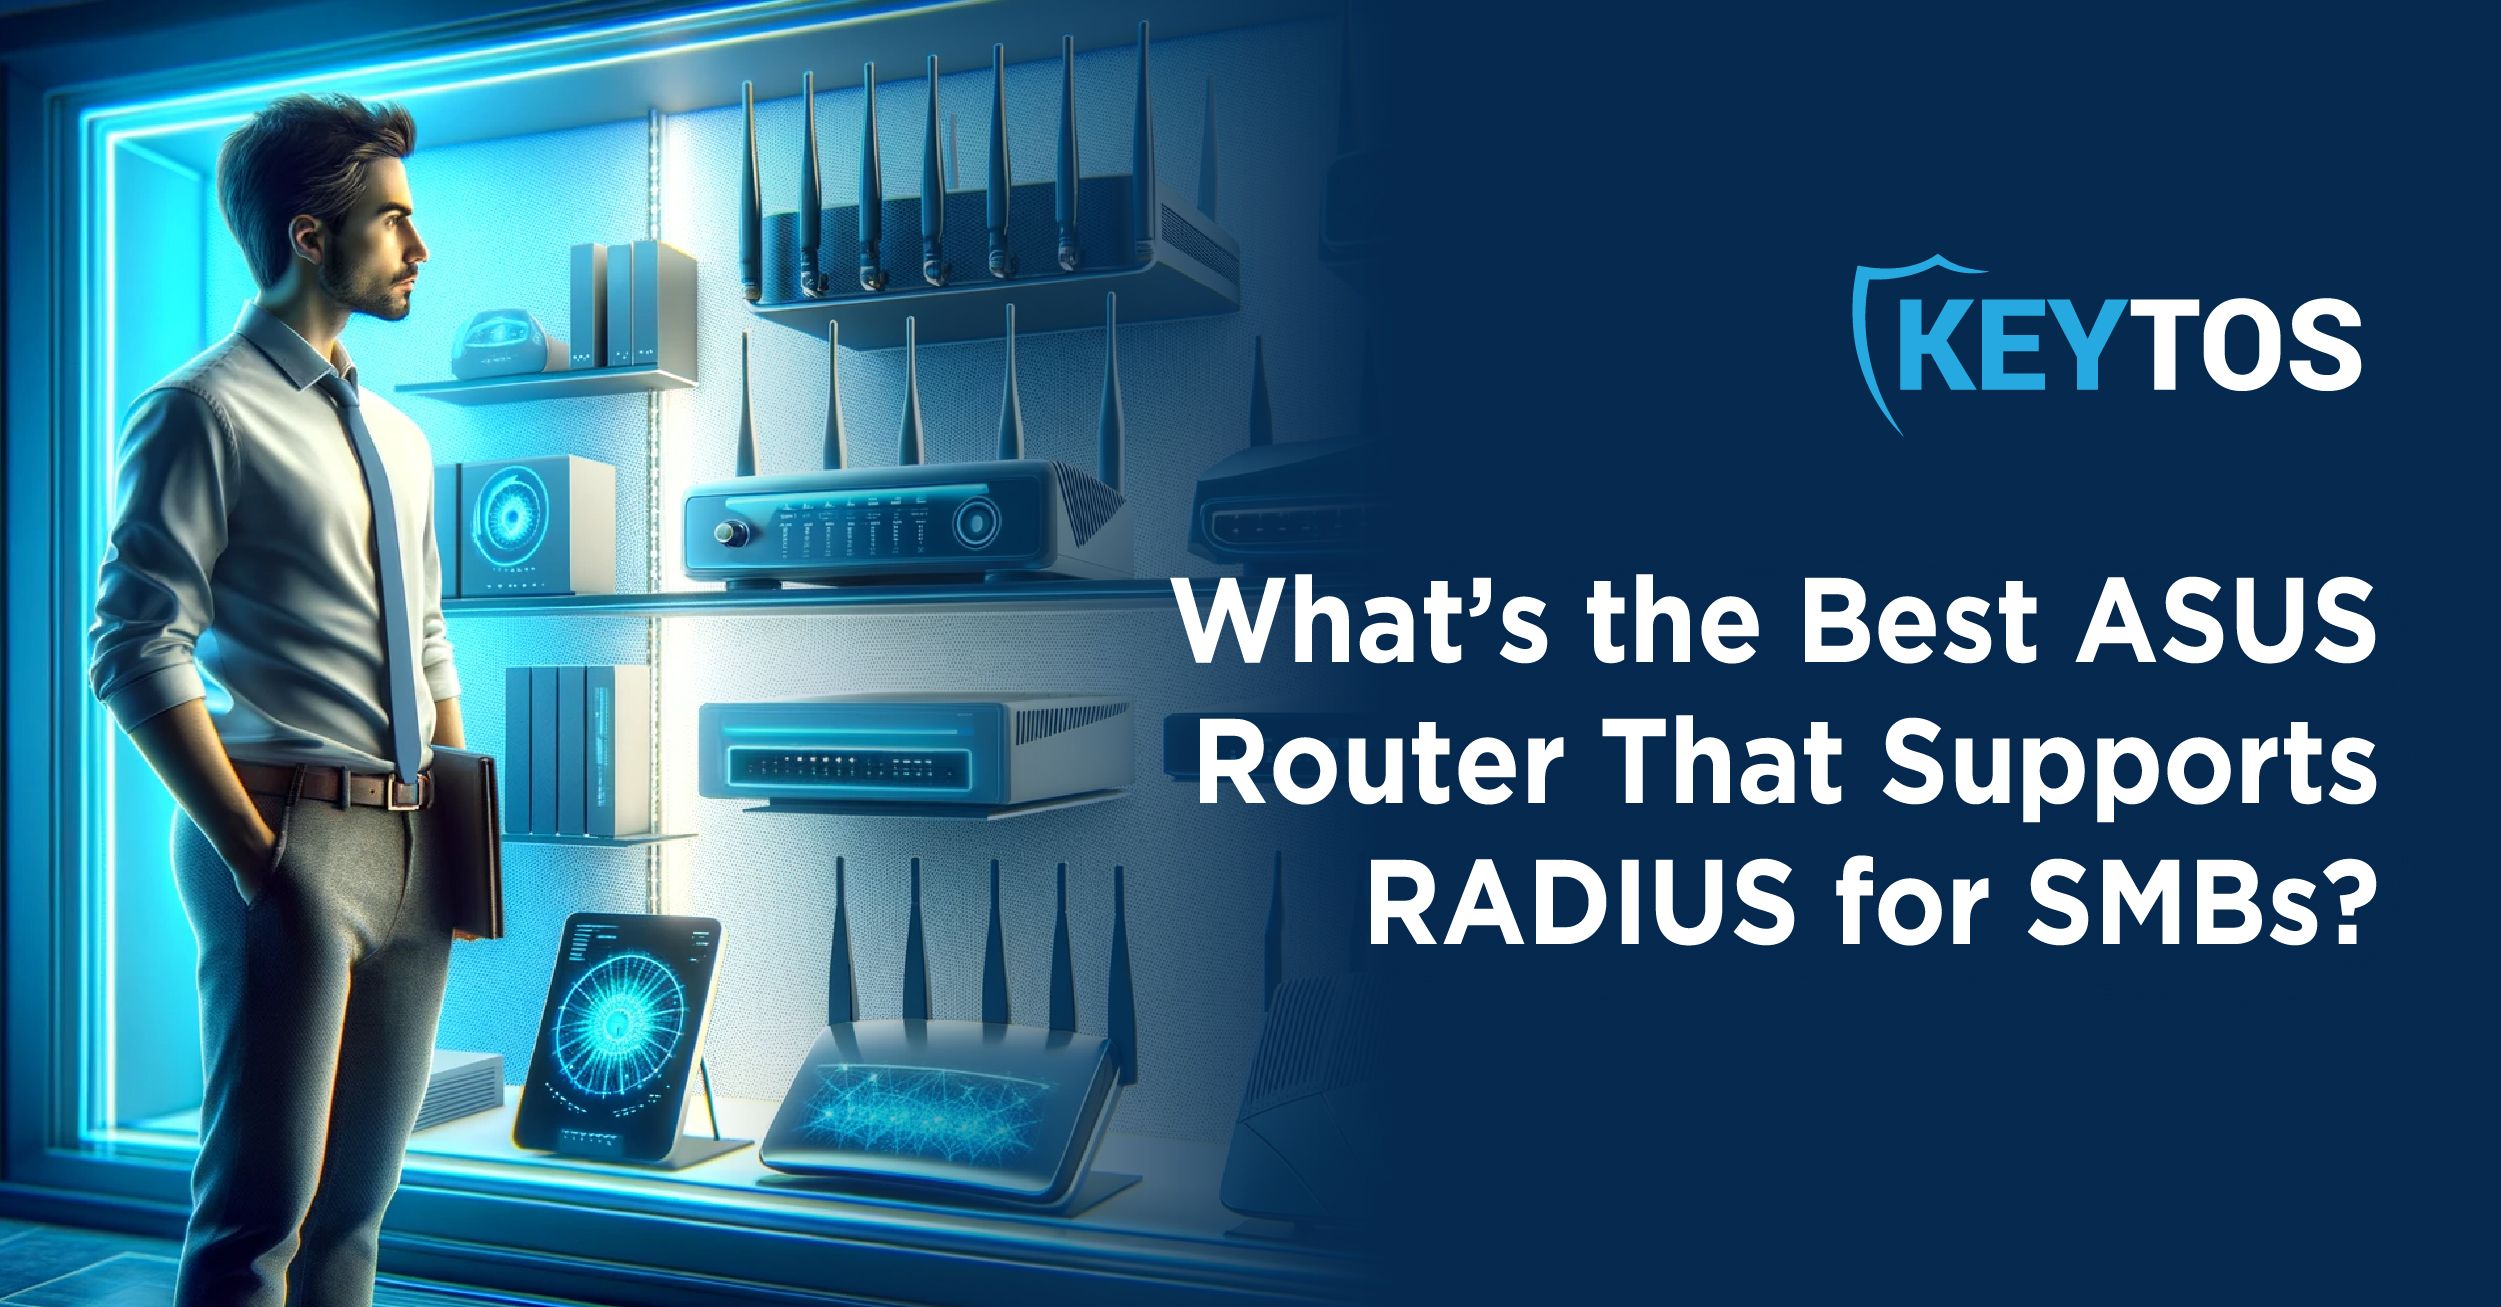 What’s the Best ASUS Router That Supports RADIUS for SMBs?